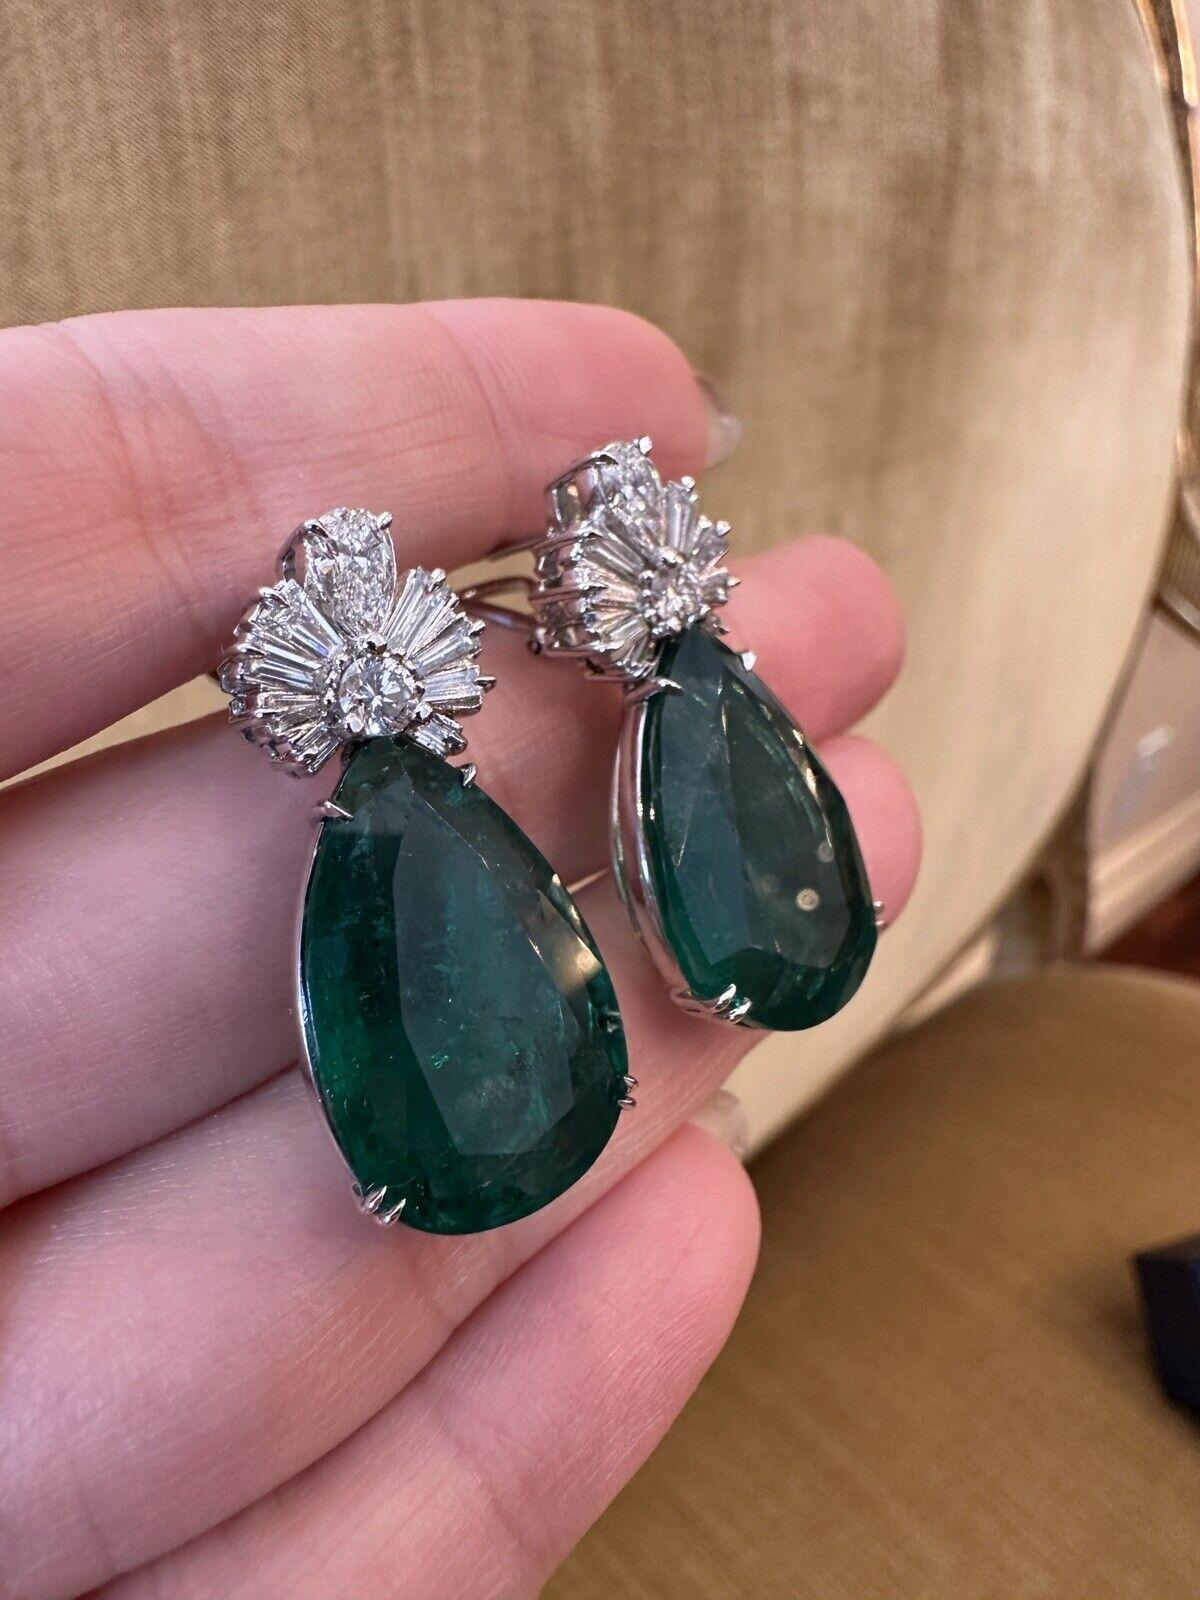 GIA Pear Emeralds 31.17 Carat Total Weight & Diamond Earrings in 18k White Gold In Excellent Condition For Sale In La Jolla, CA